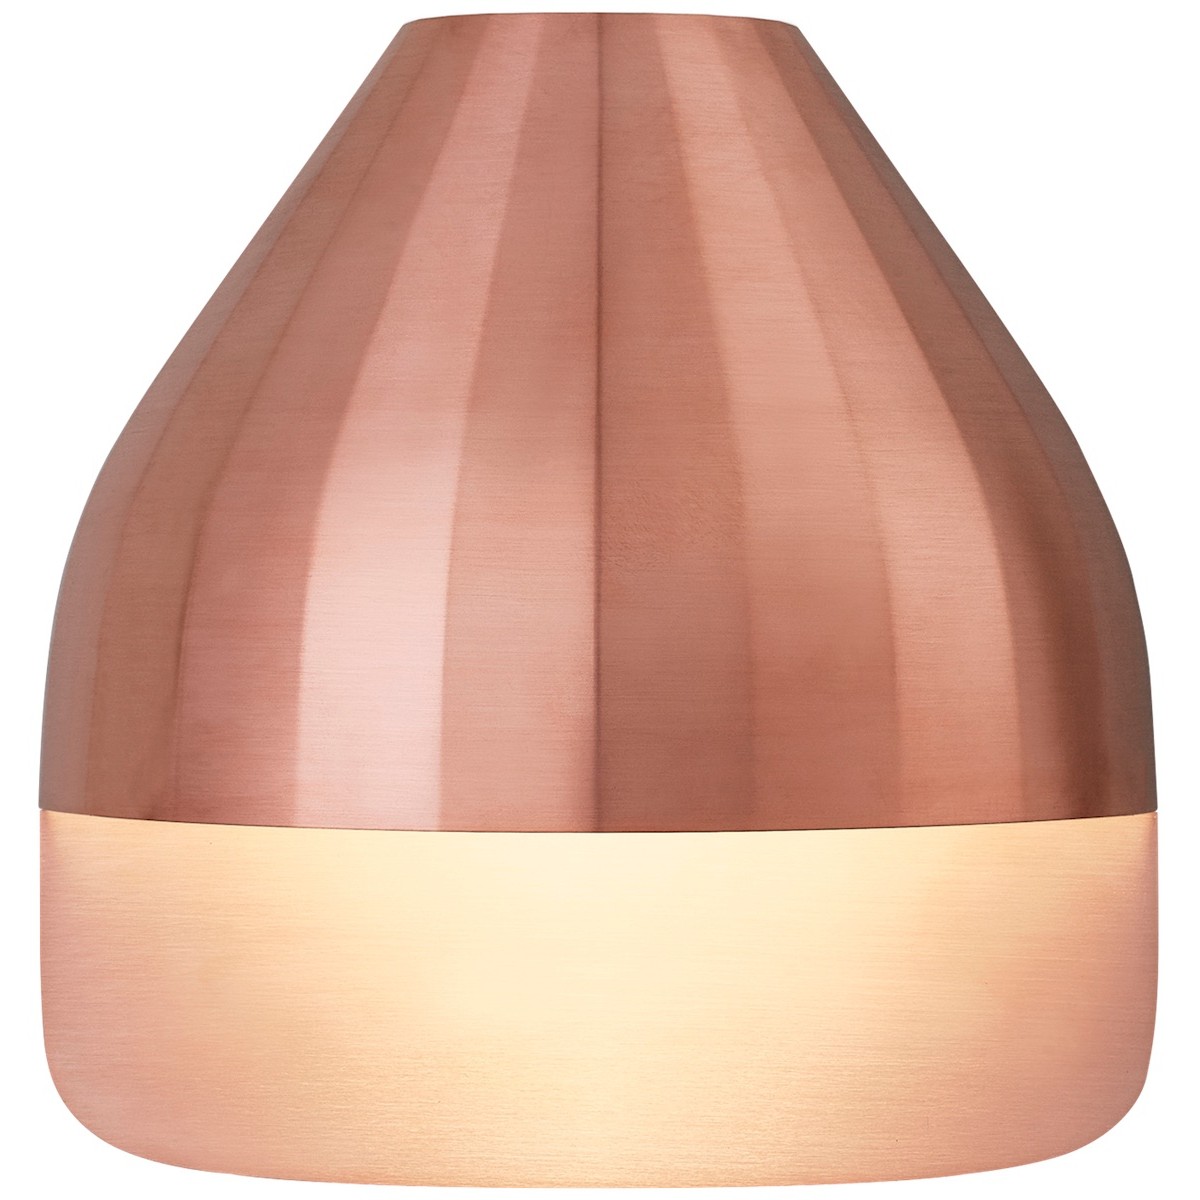 SOLD OUT - Facet wall lamp copper + small reflective plate - out of stock